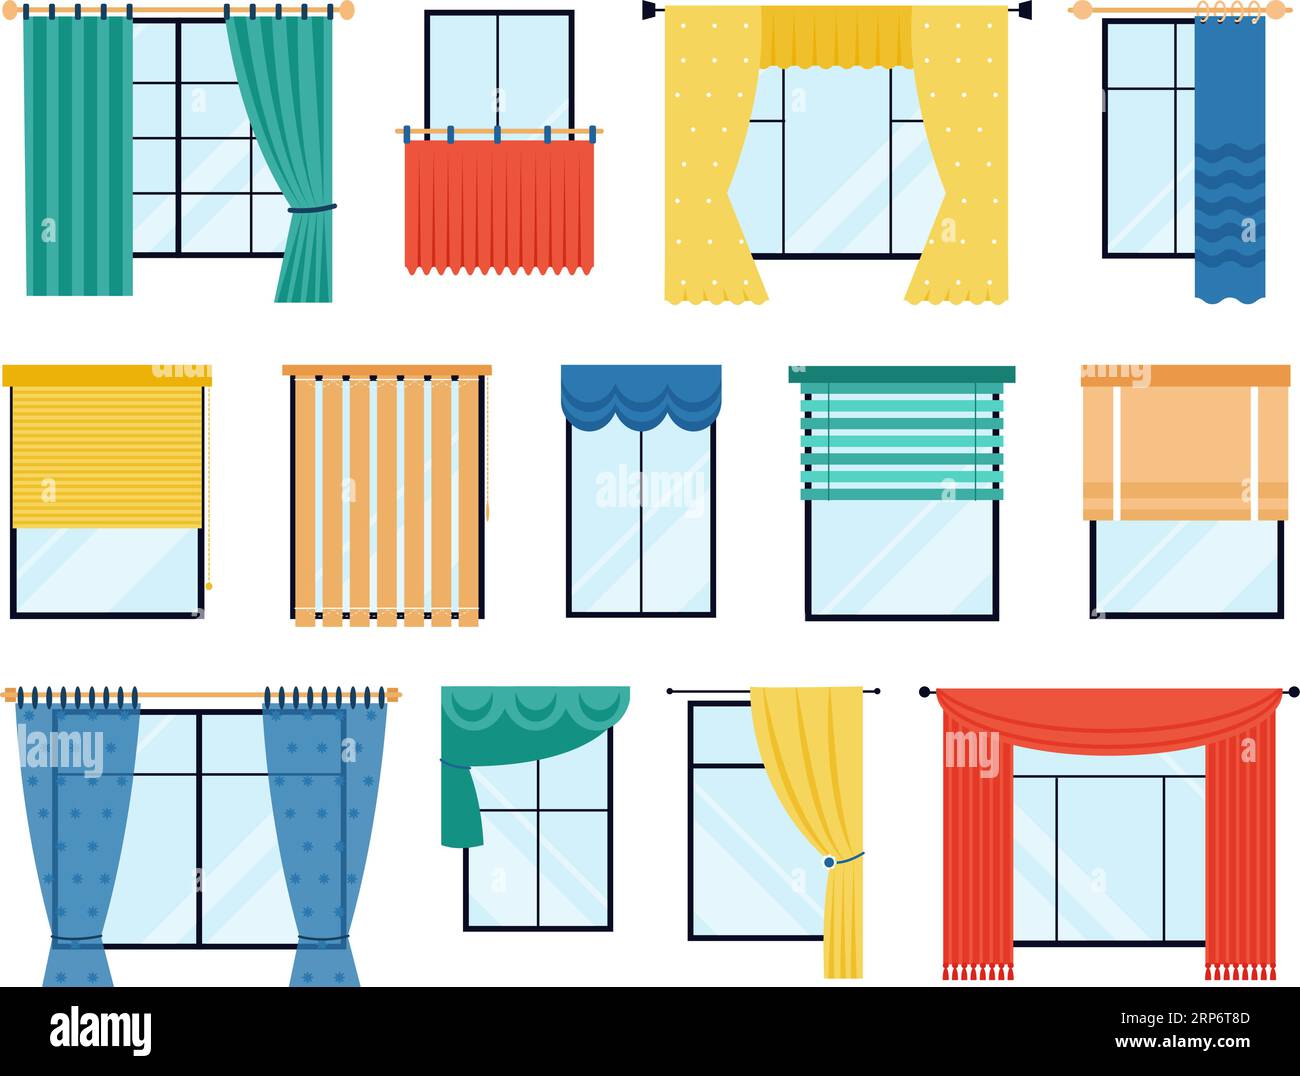 Flat curtains on windows. Color curtain, window decorations and blinds. Room decorative interior accessories, fabric design decent vector elements Stock Vector